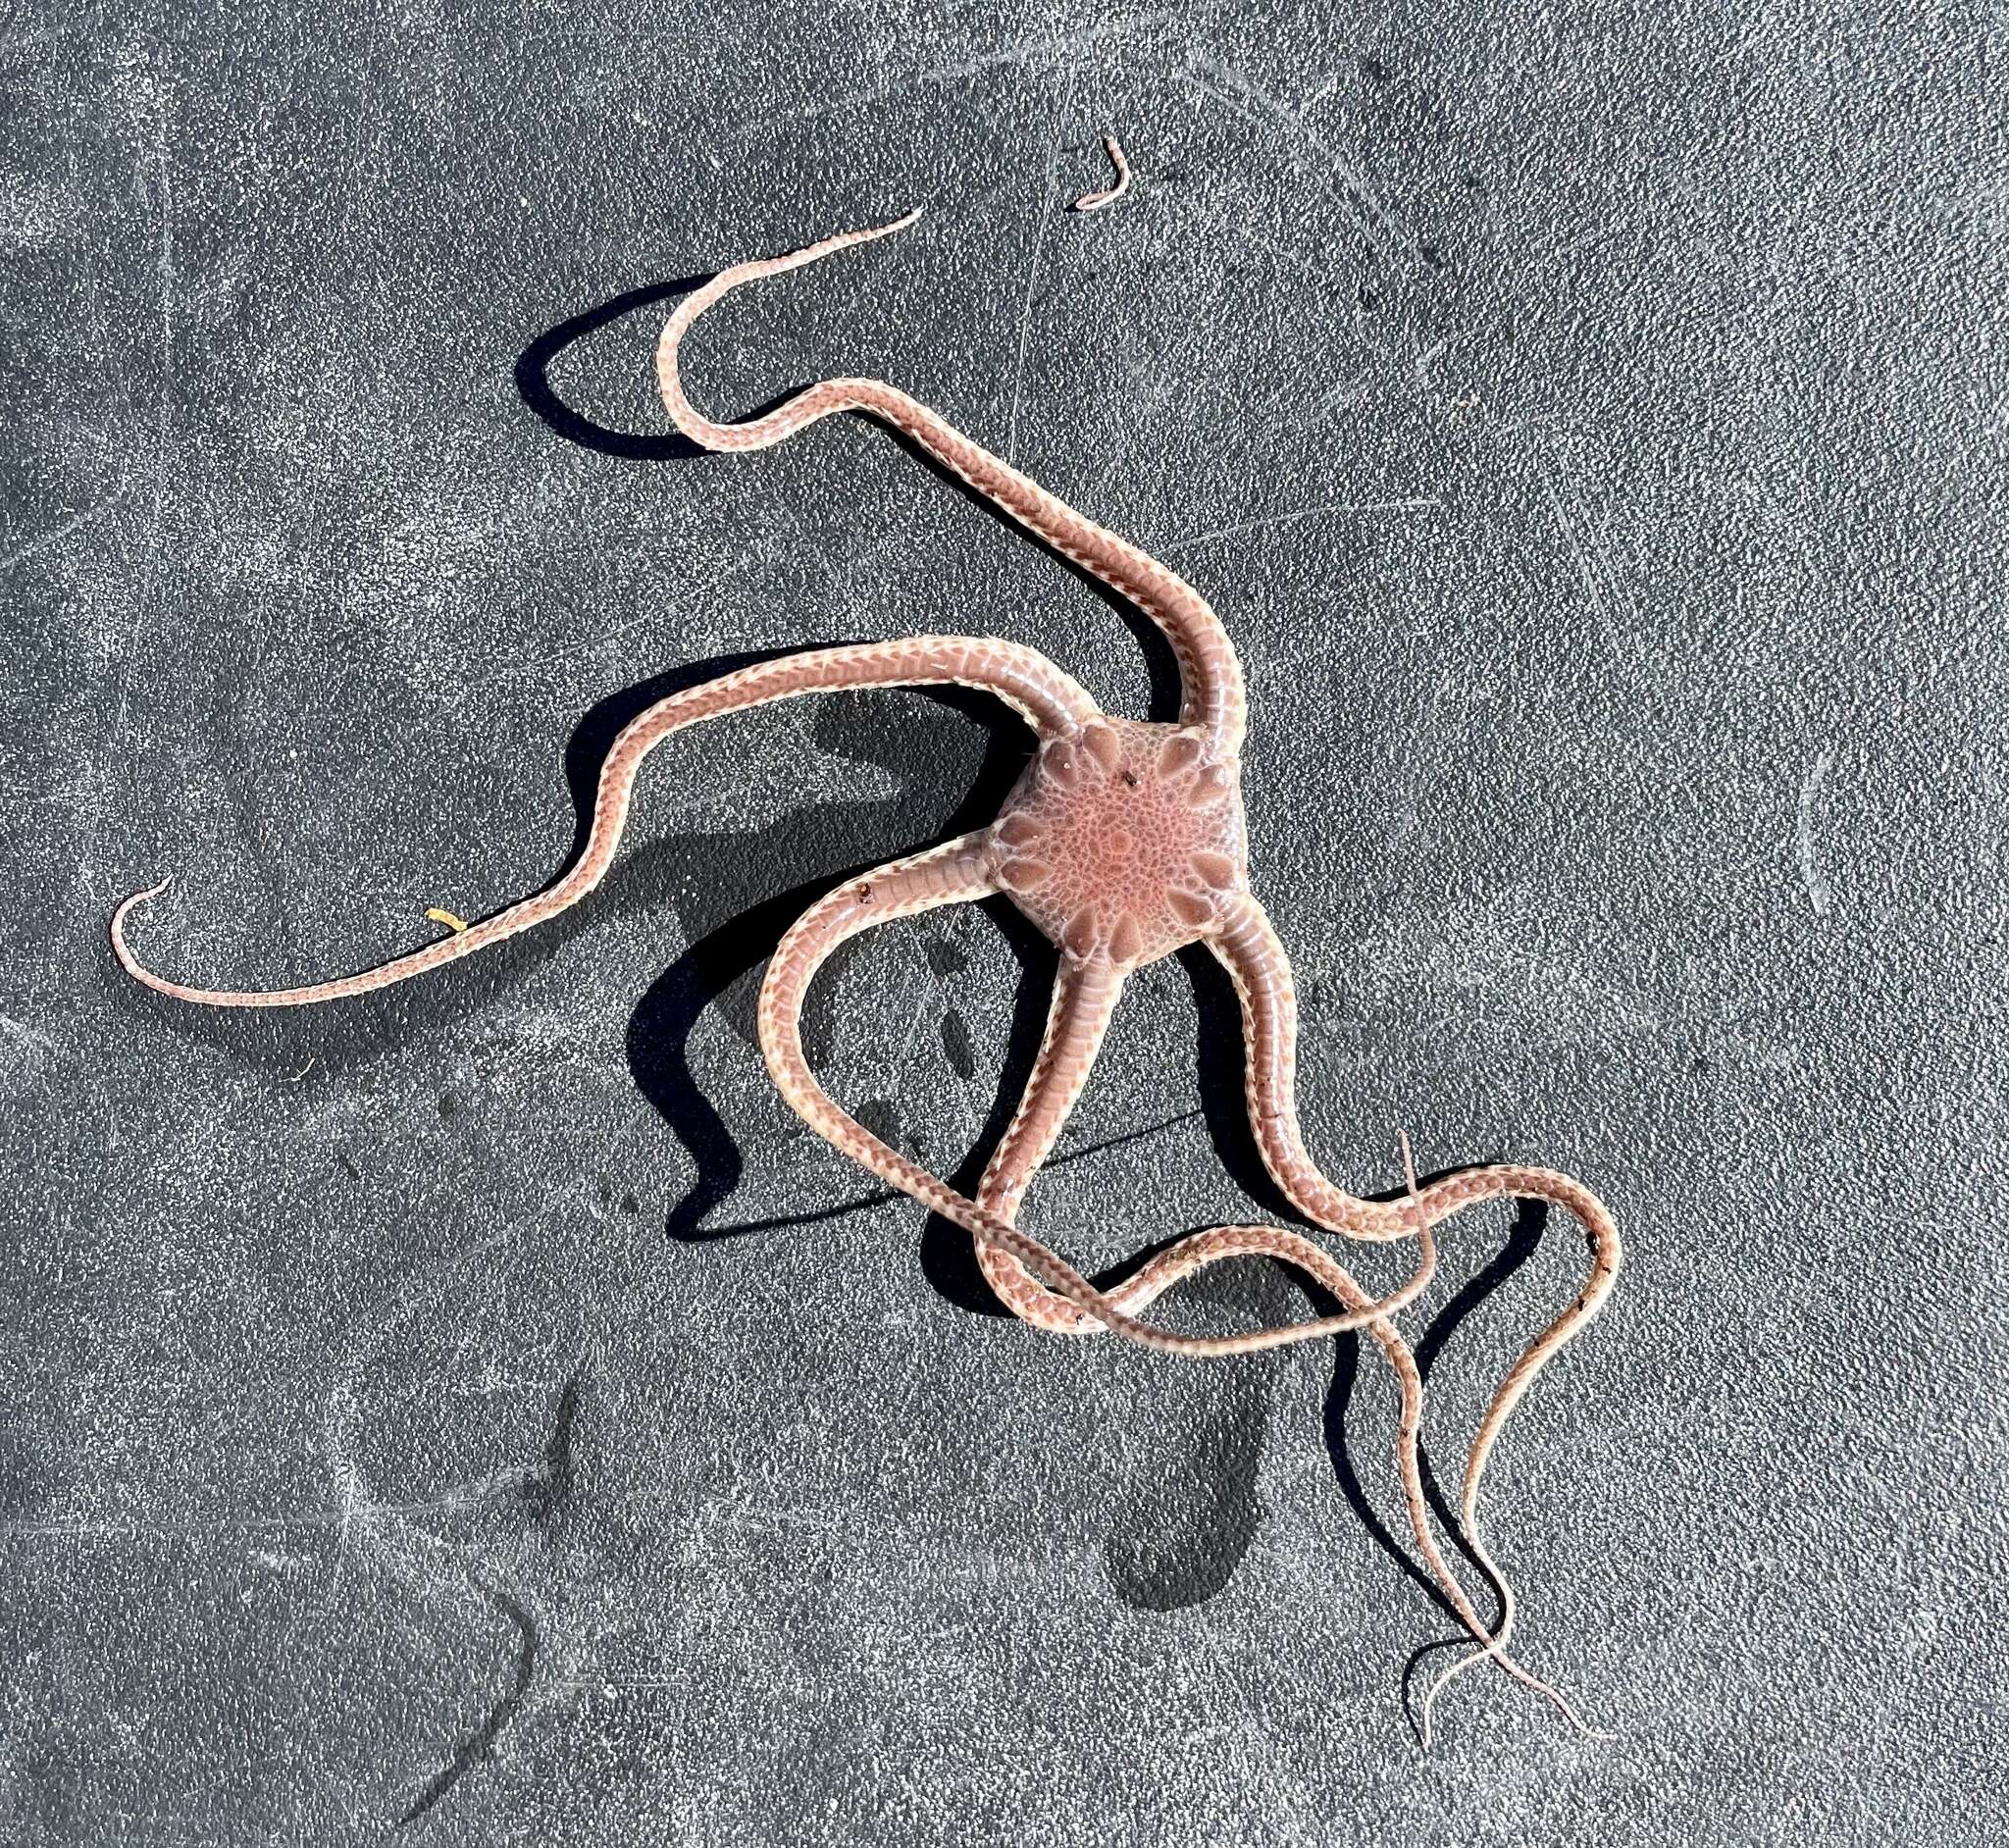 Image of Notched brittle star